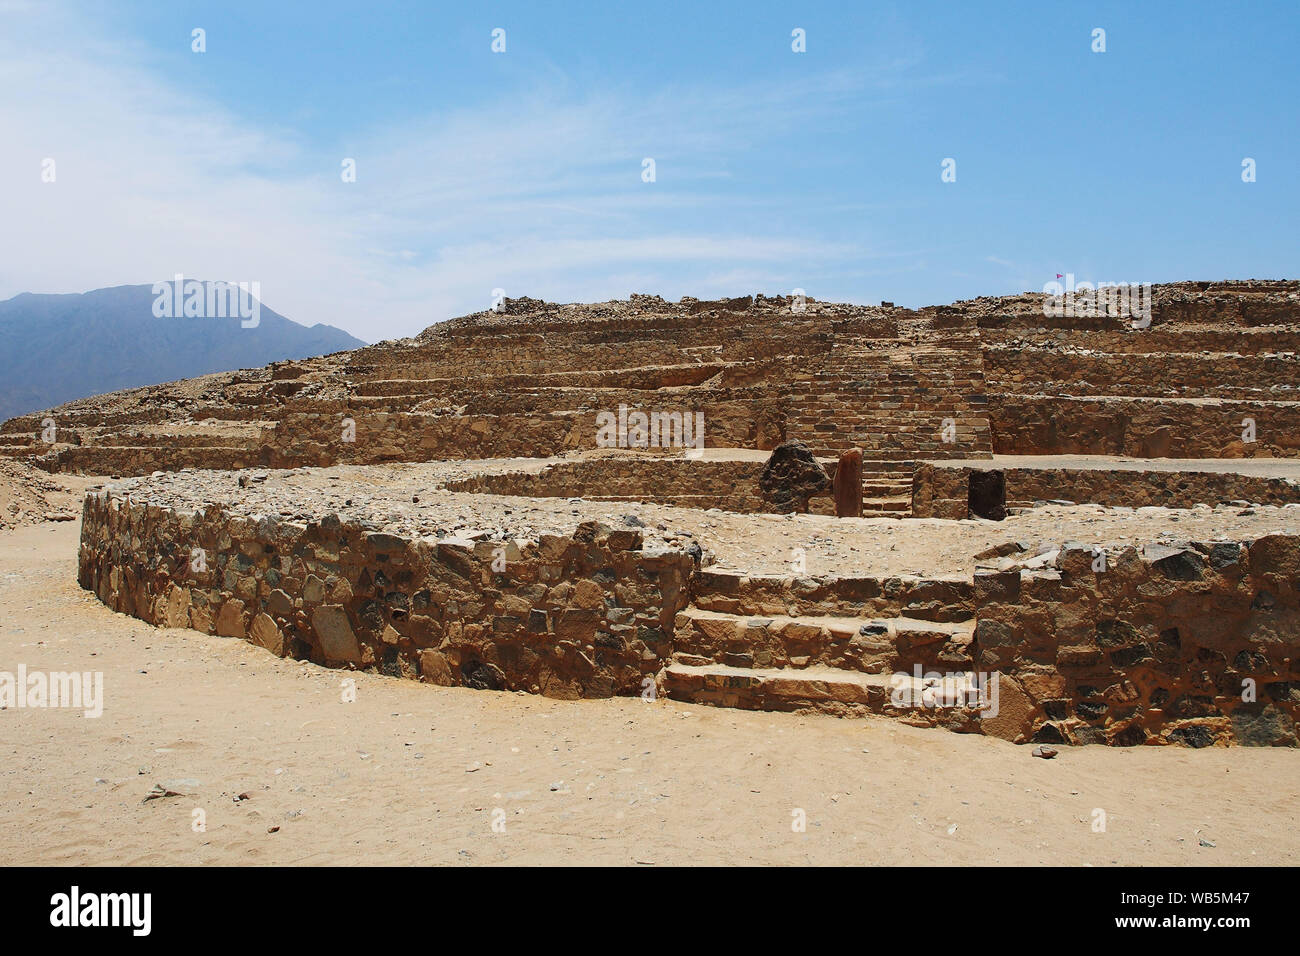 View of a circular plaza of the ancient sacred citadel of Caral. The sacred city of Caral is considered as the oldest civilization in America, its remains date from 3,500 BC. Stock Photo